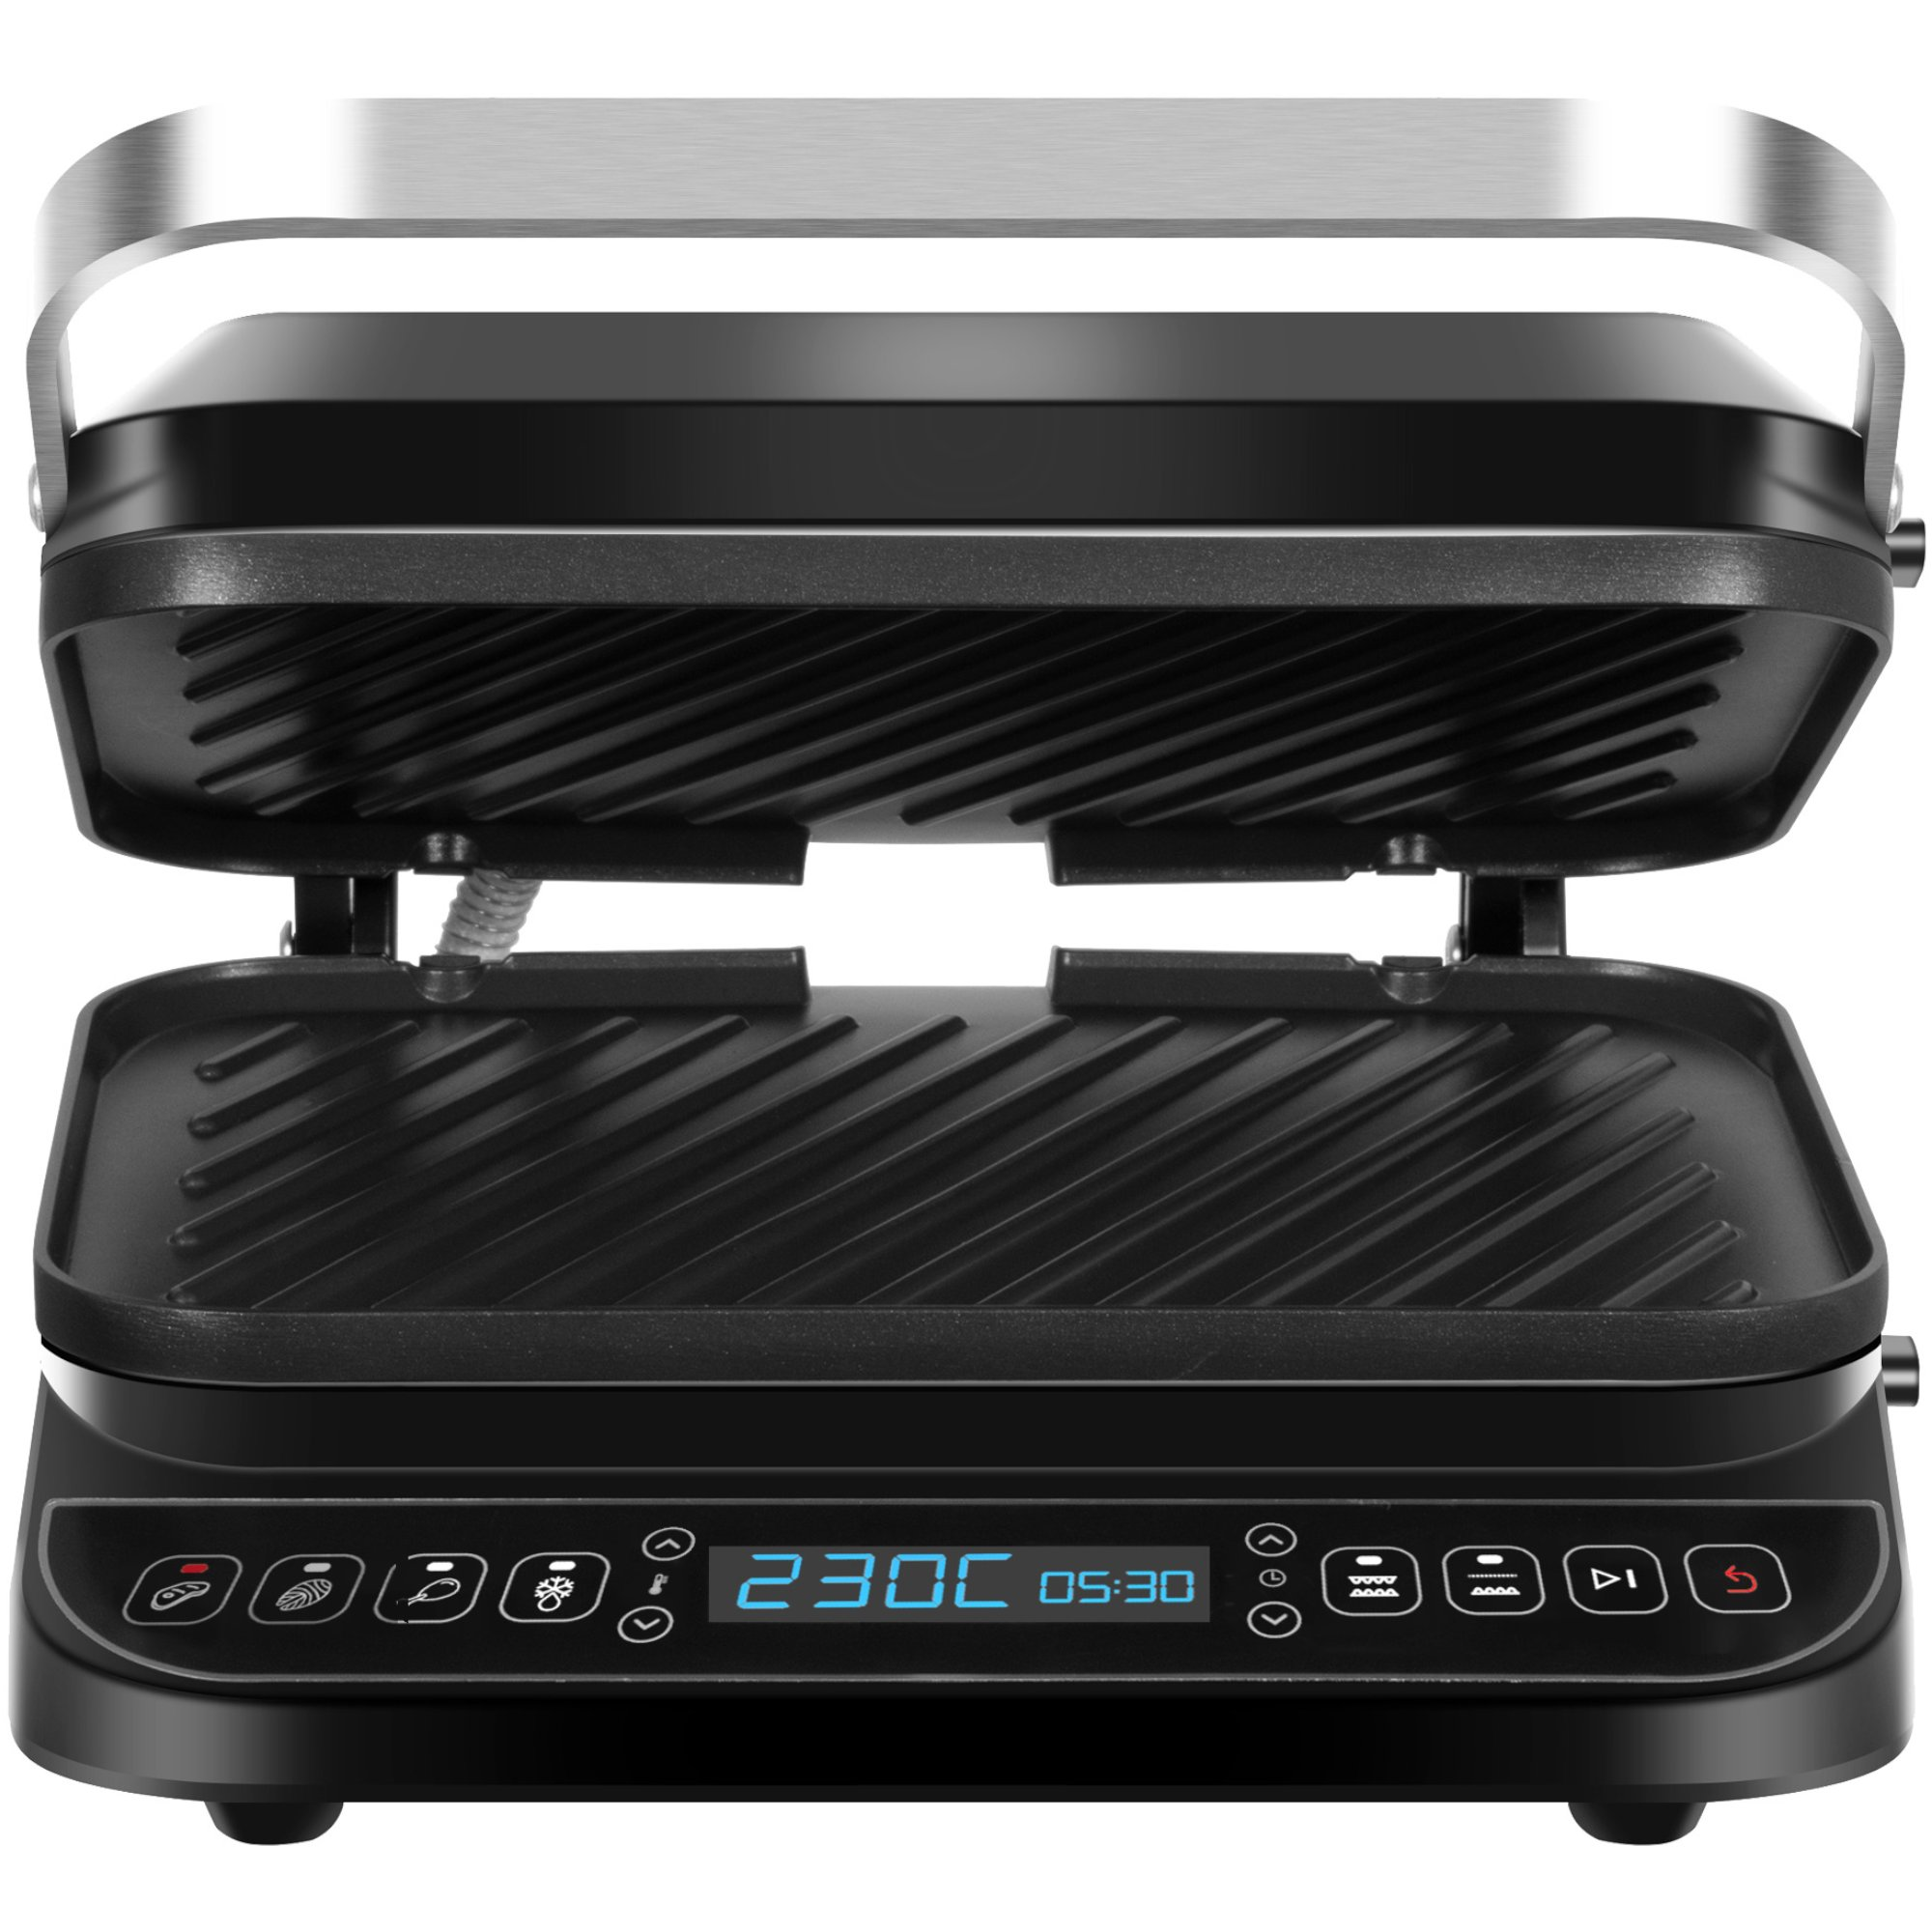 BY Z-LINE TT-CG900-Silber Tischgrill, Silver TURBOTRONIC